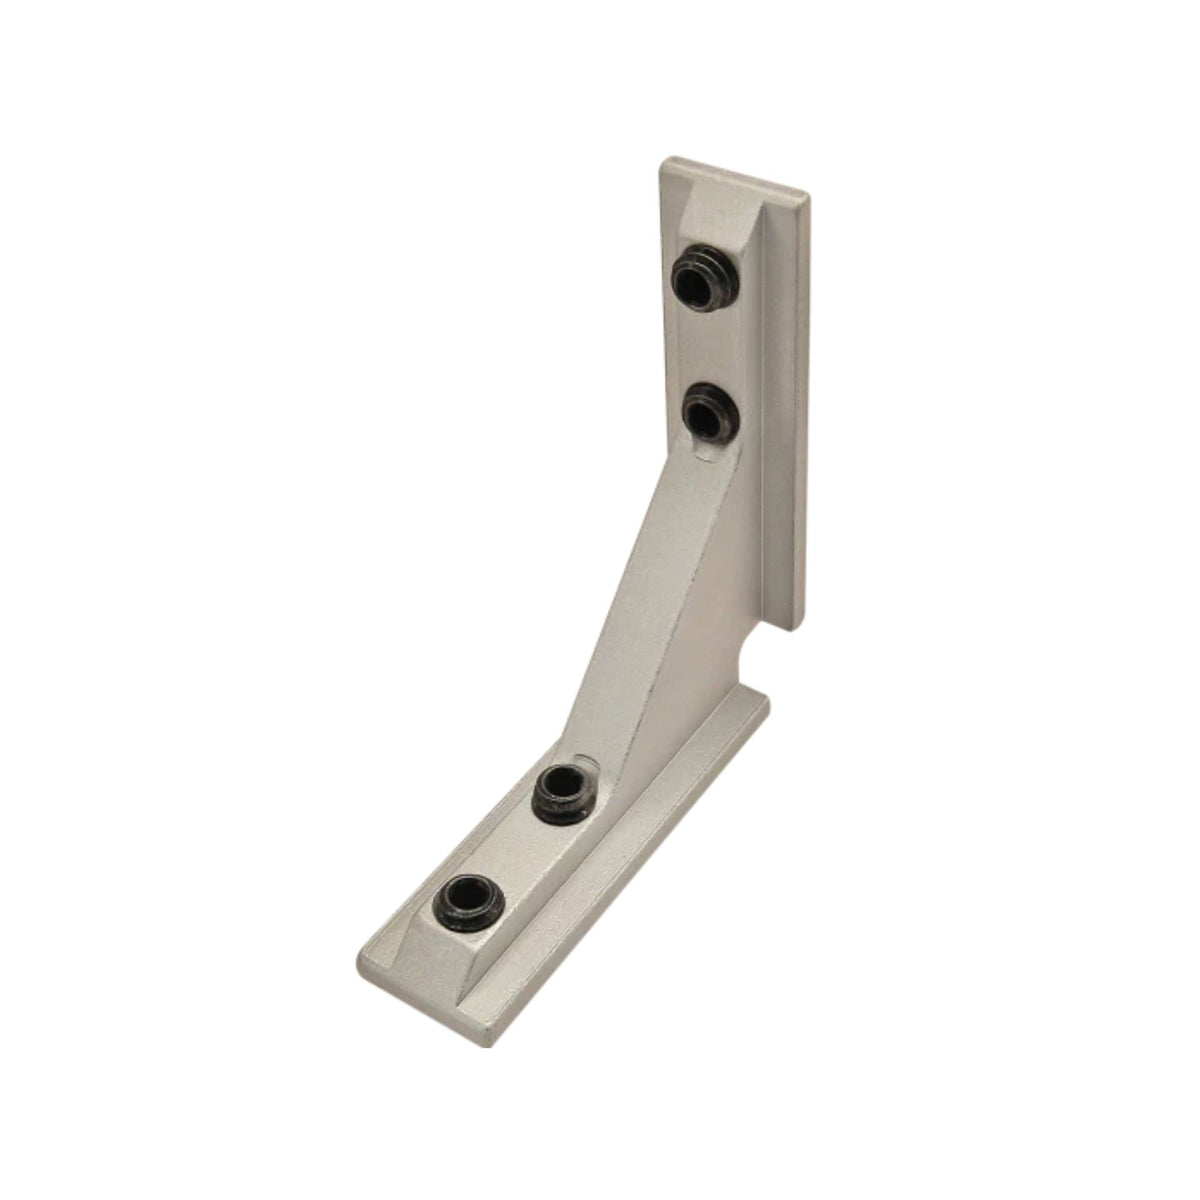 metal, L shaped corner connector piece with rectangular sides and two black screws set in each side